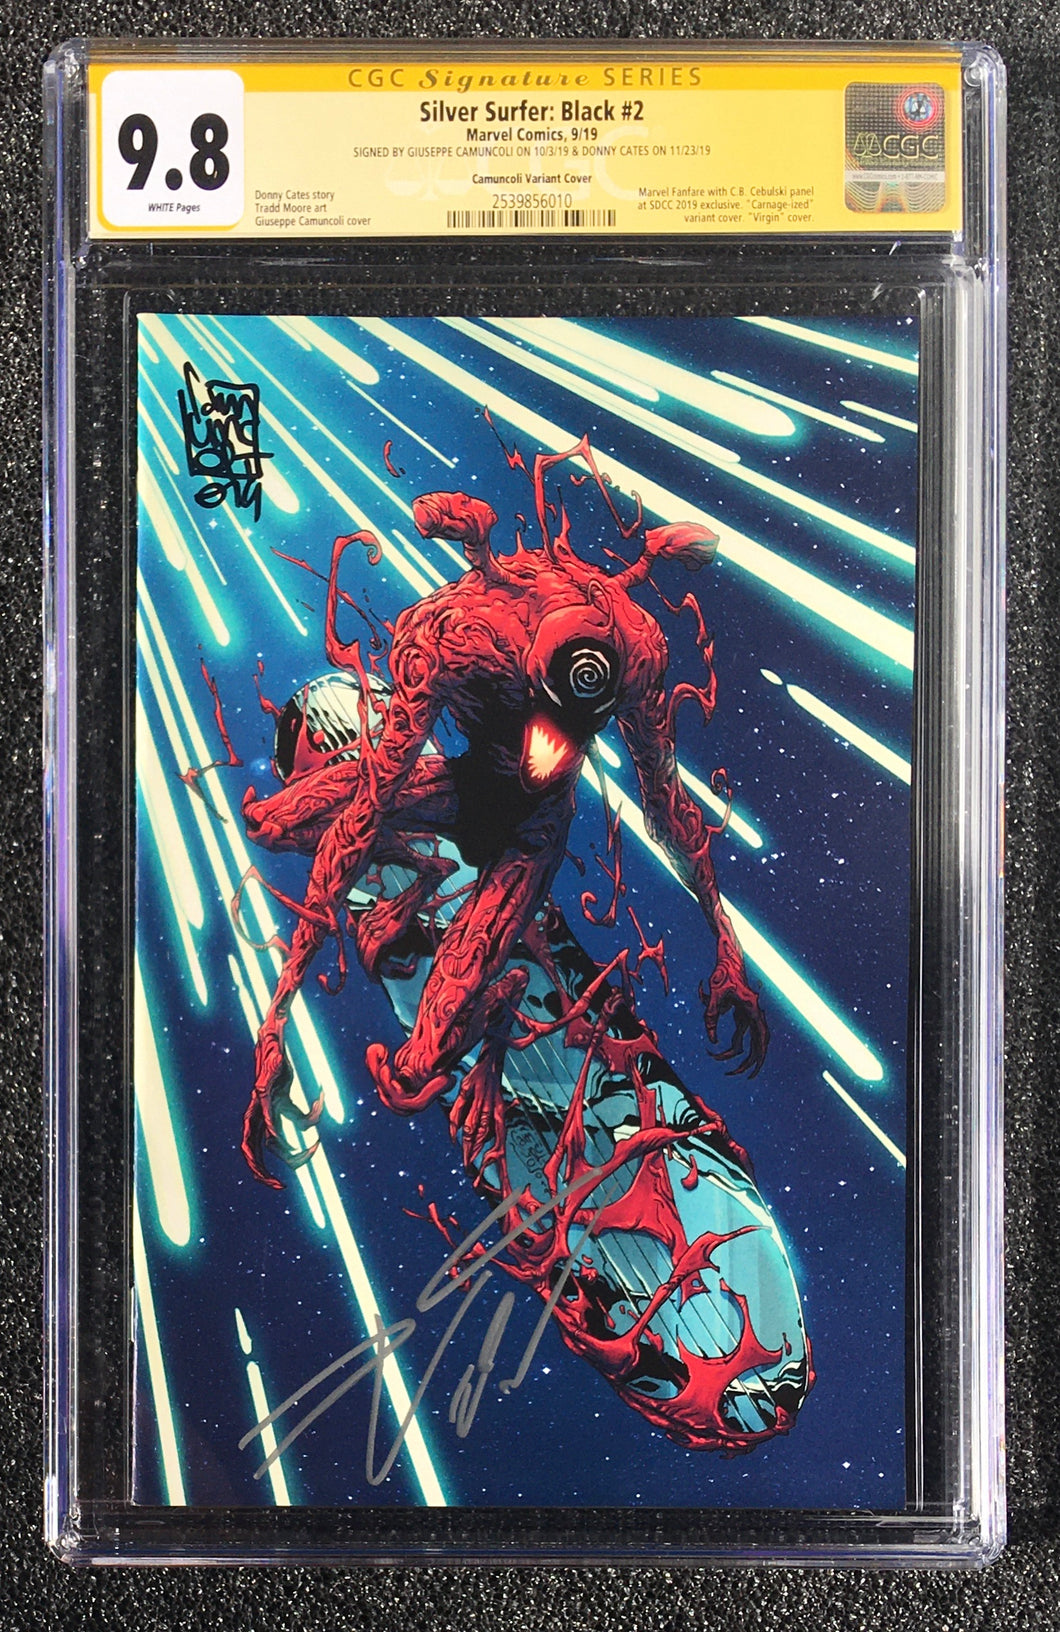 CGC 9.8 SS Silver Surfer Black # 2 Double Signed - Cates and Camuncoli